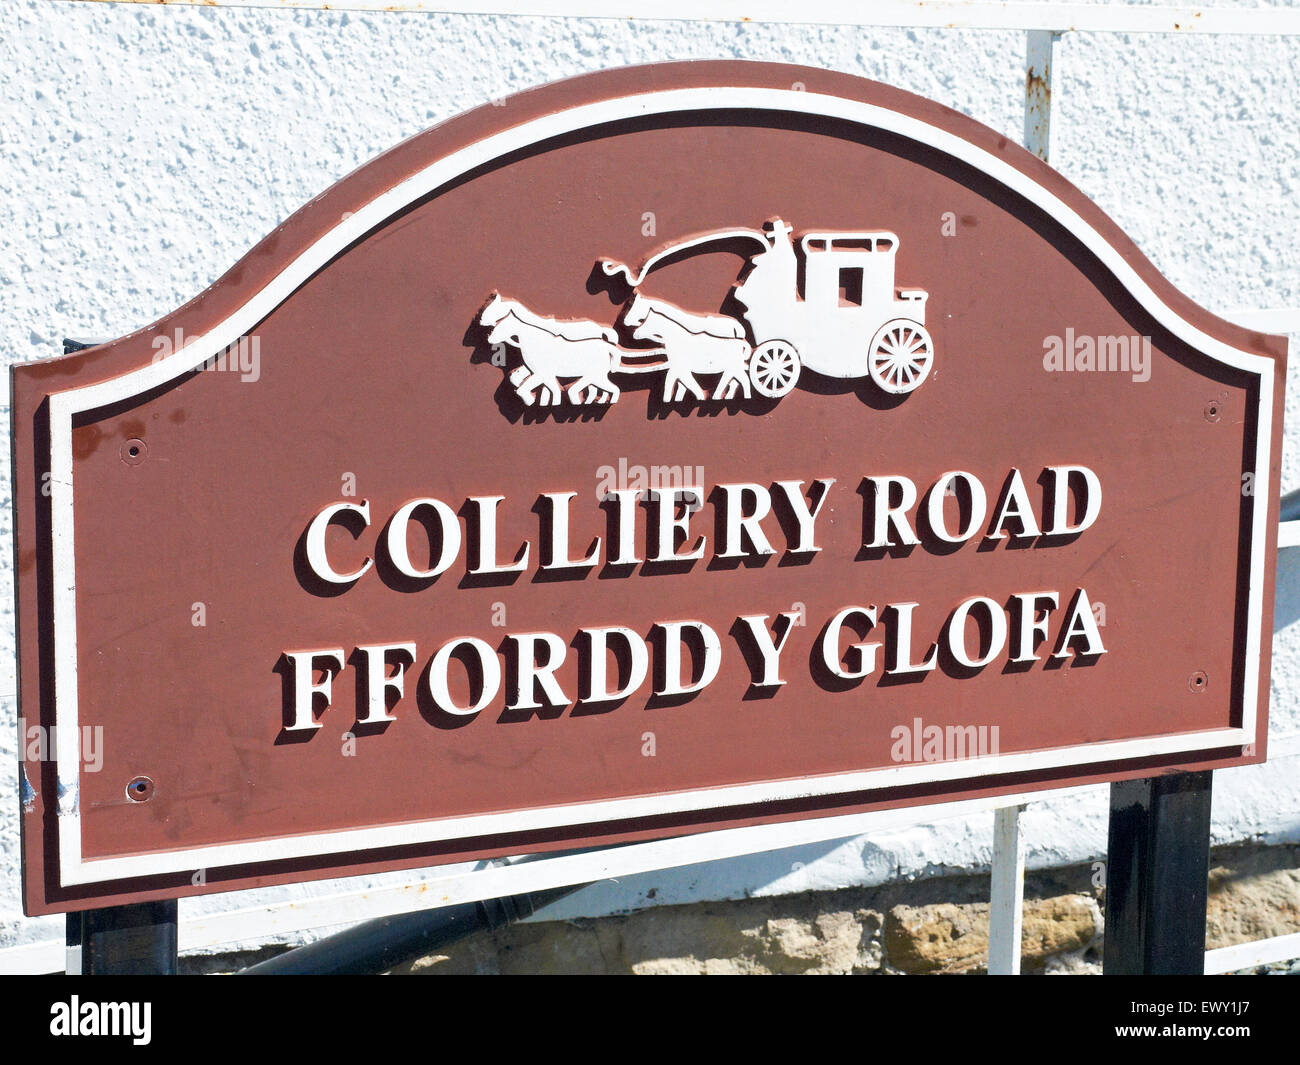 Colliery Road, ghisa nome strada in Chirk Wales UK Foto Stock